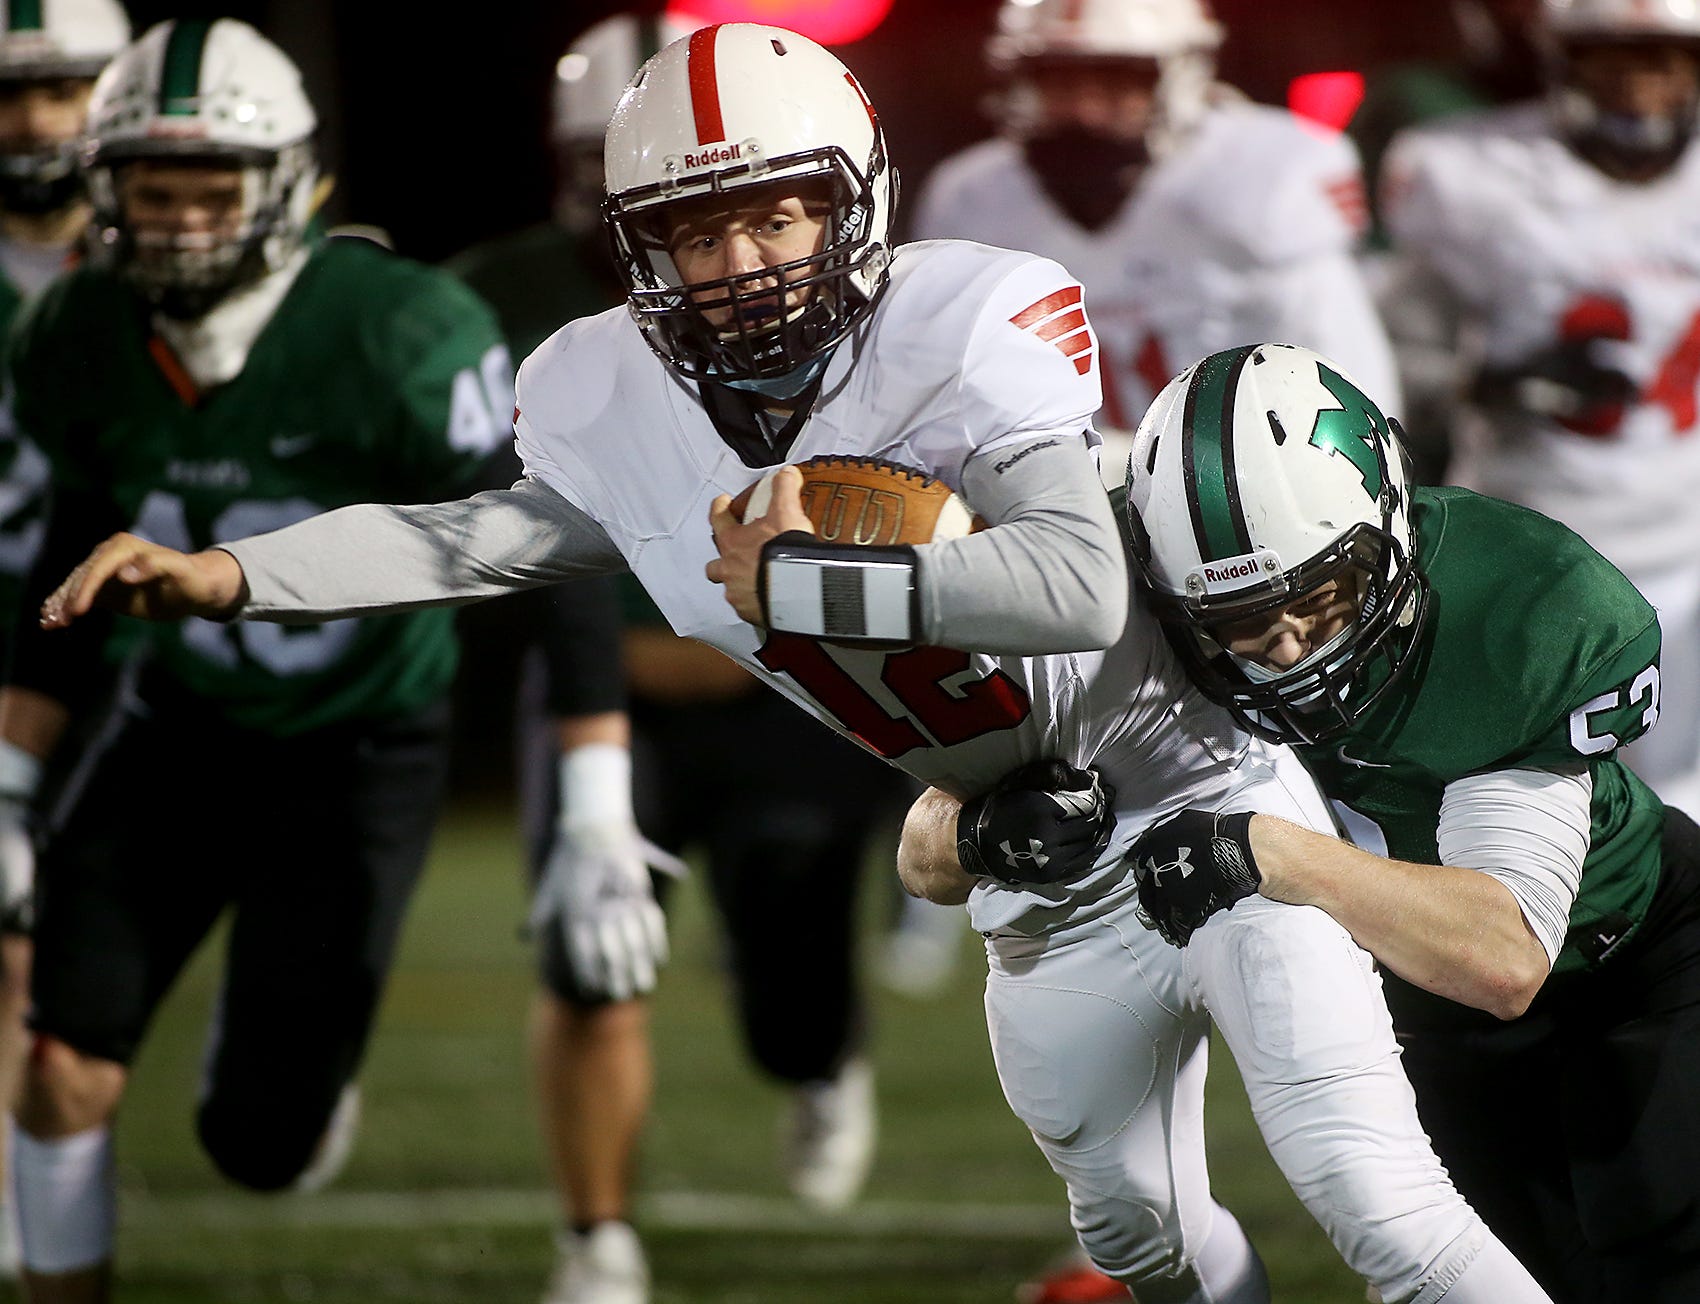 Marshfield High football takes on Mansfield on Friday in marquee matchup